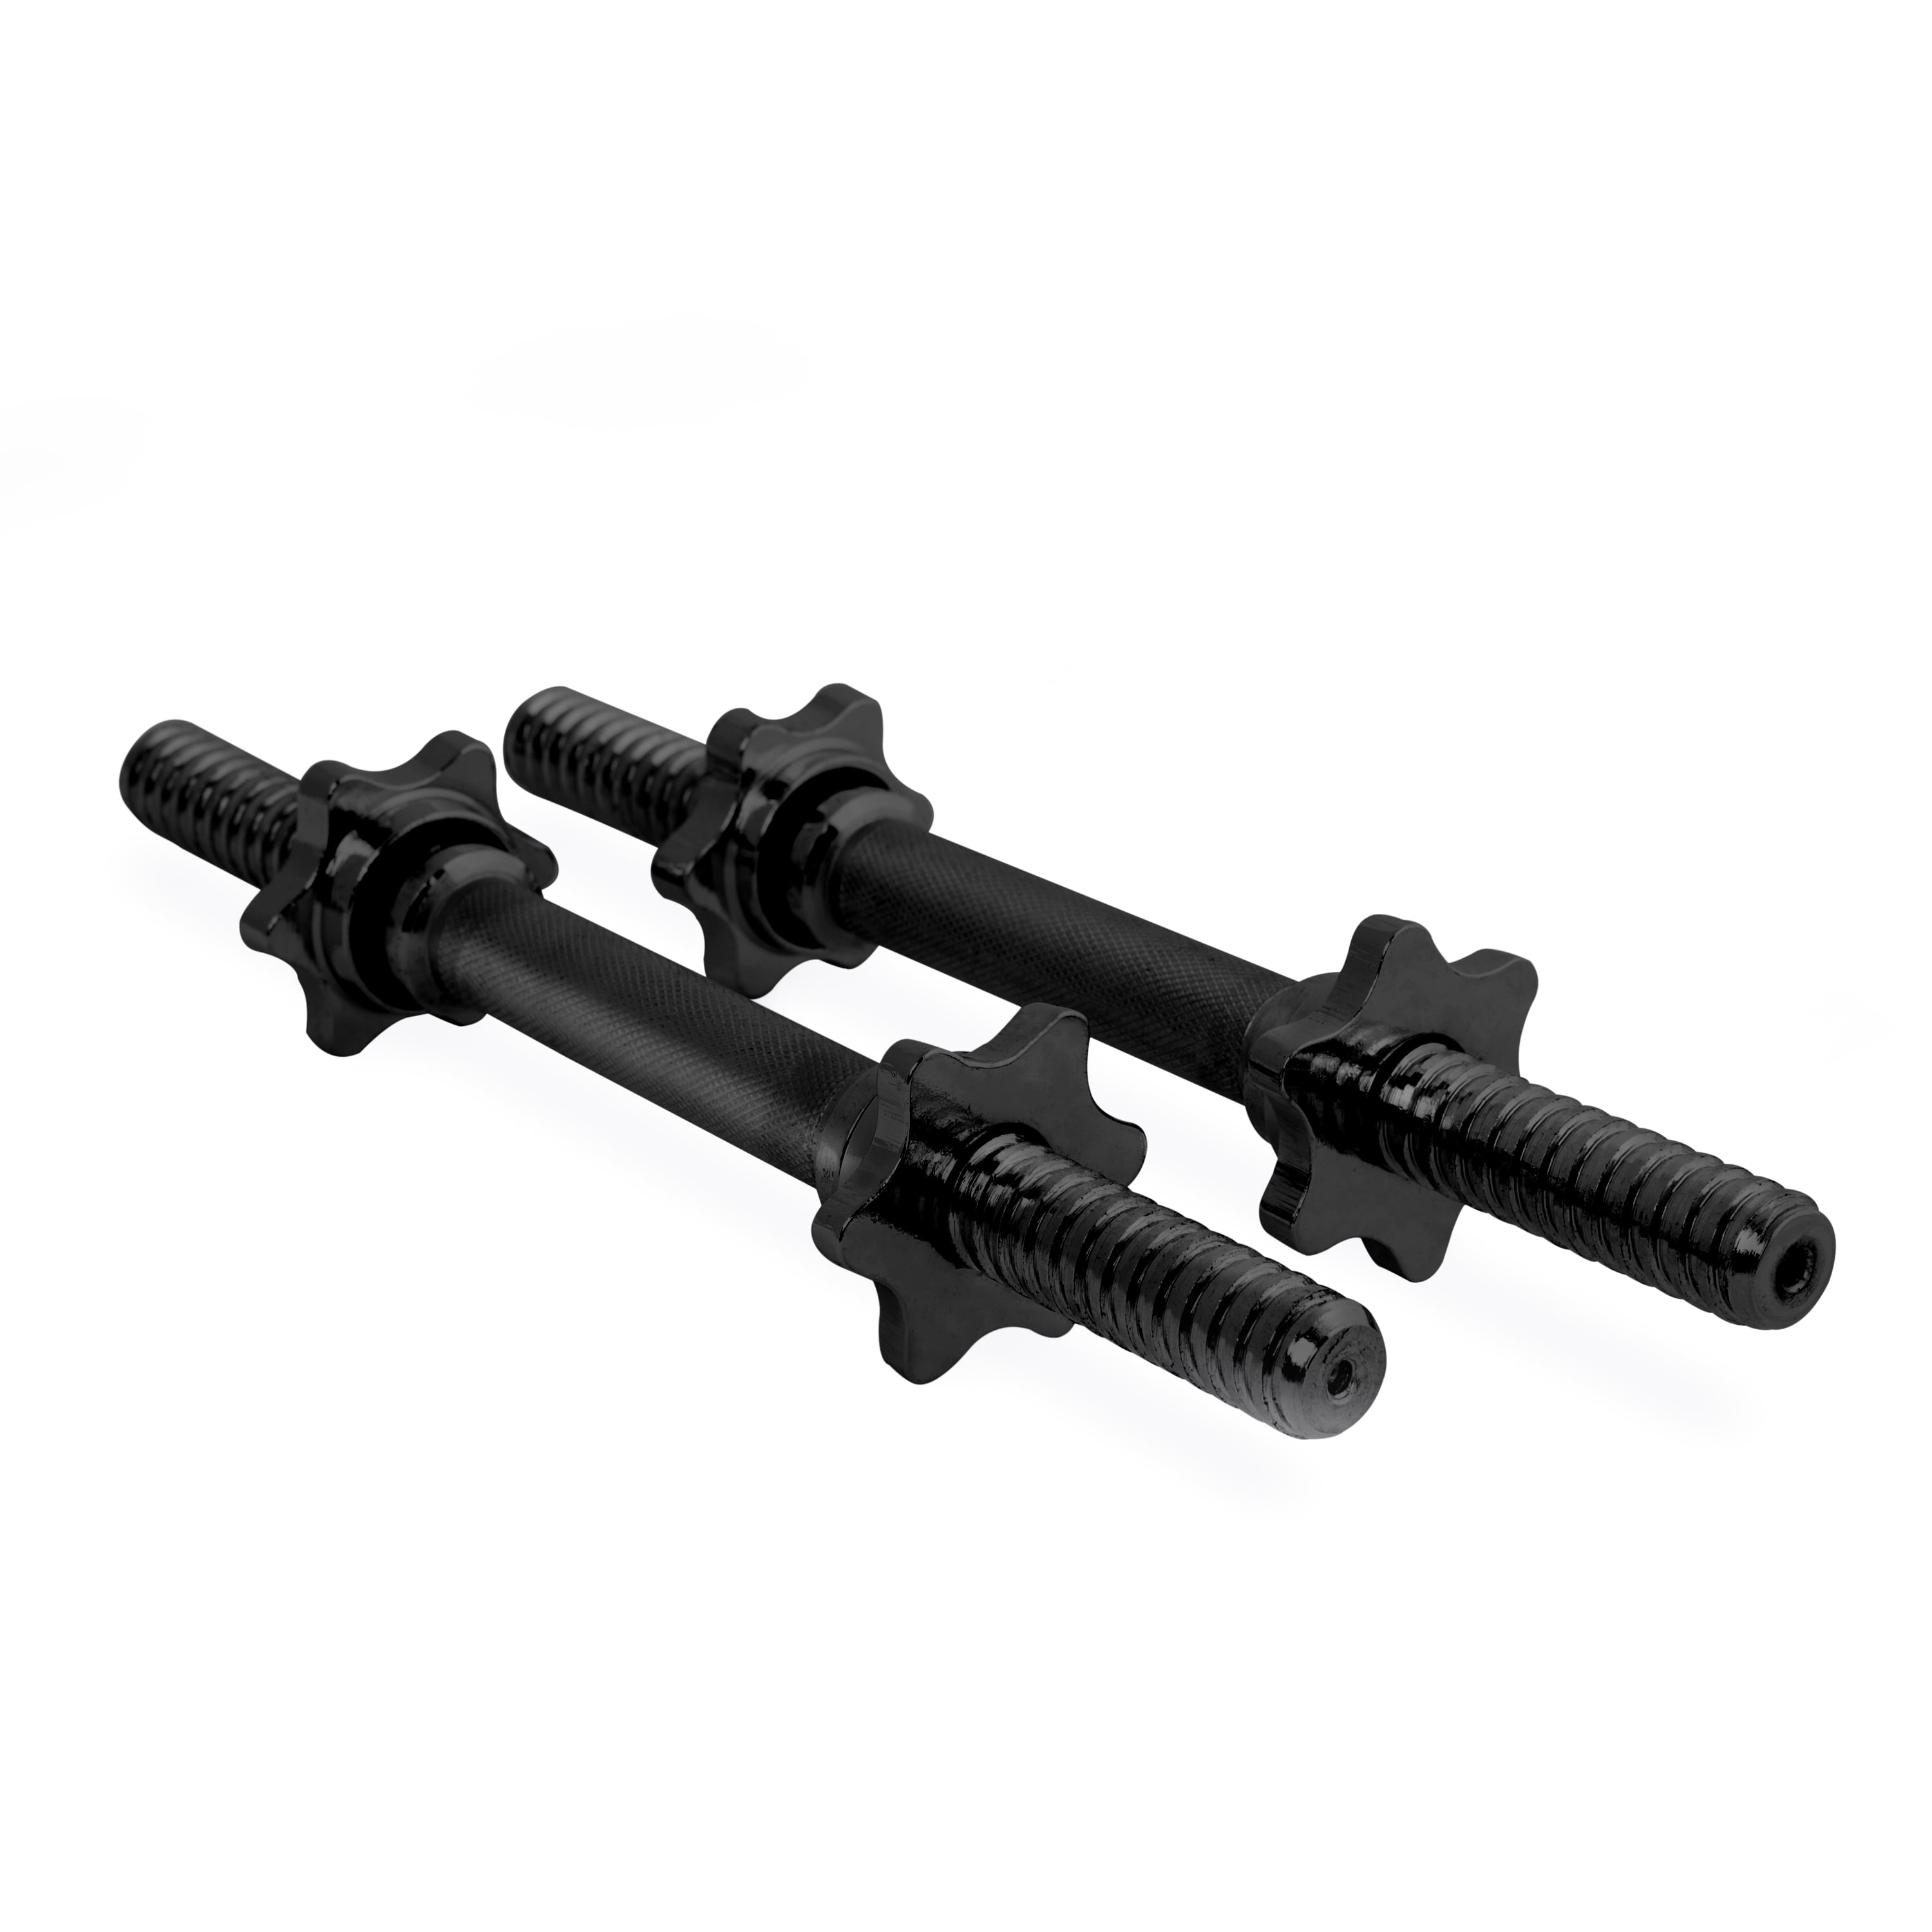 Details about   Pair of 18in Adjustable Dumbbell Handles Threaded Dumbbell Bar with Star Collars 